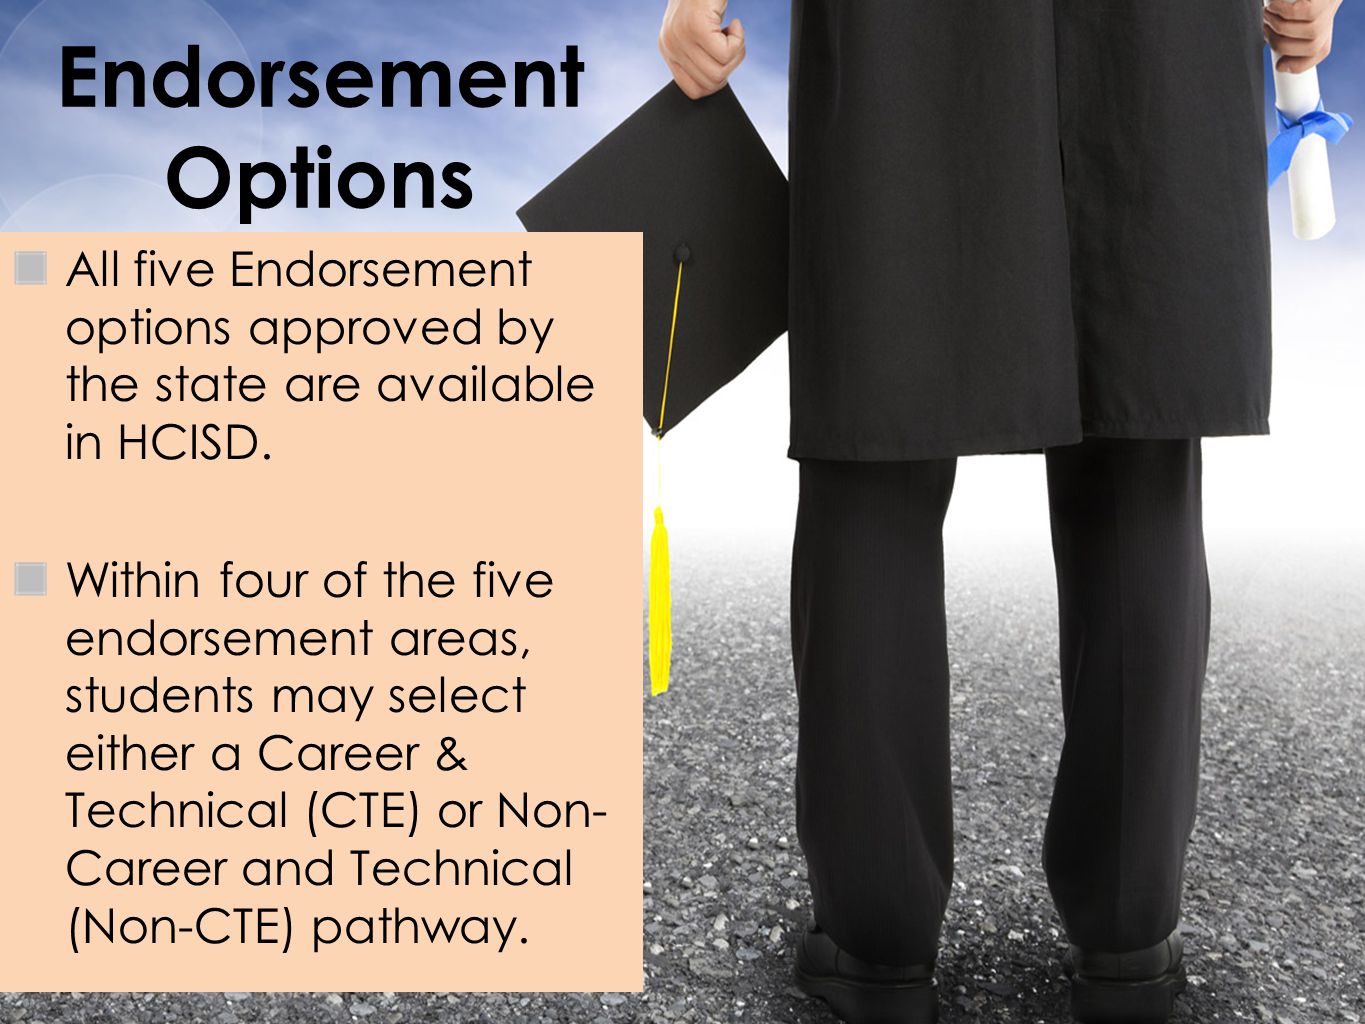 Endorsement Options All five Endorsement options approved by the state are available in HCISD.